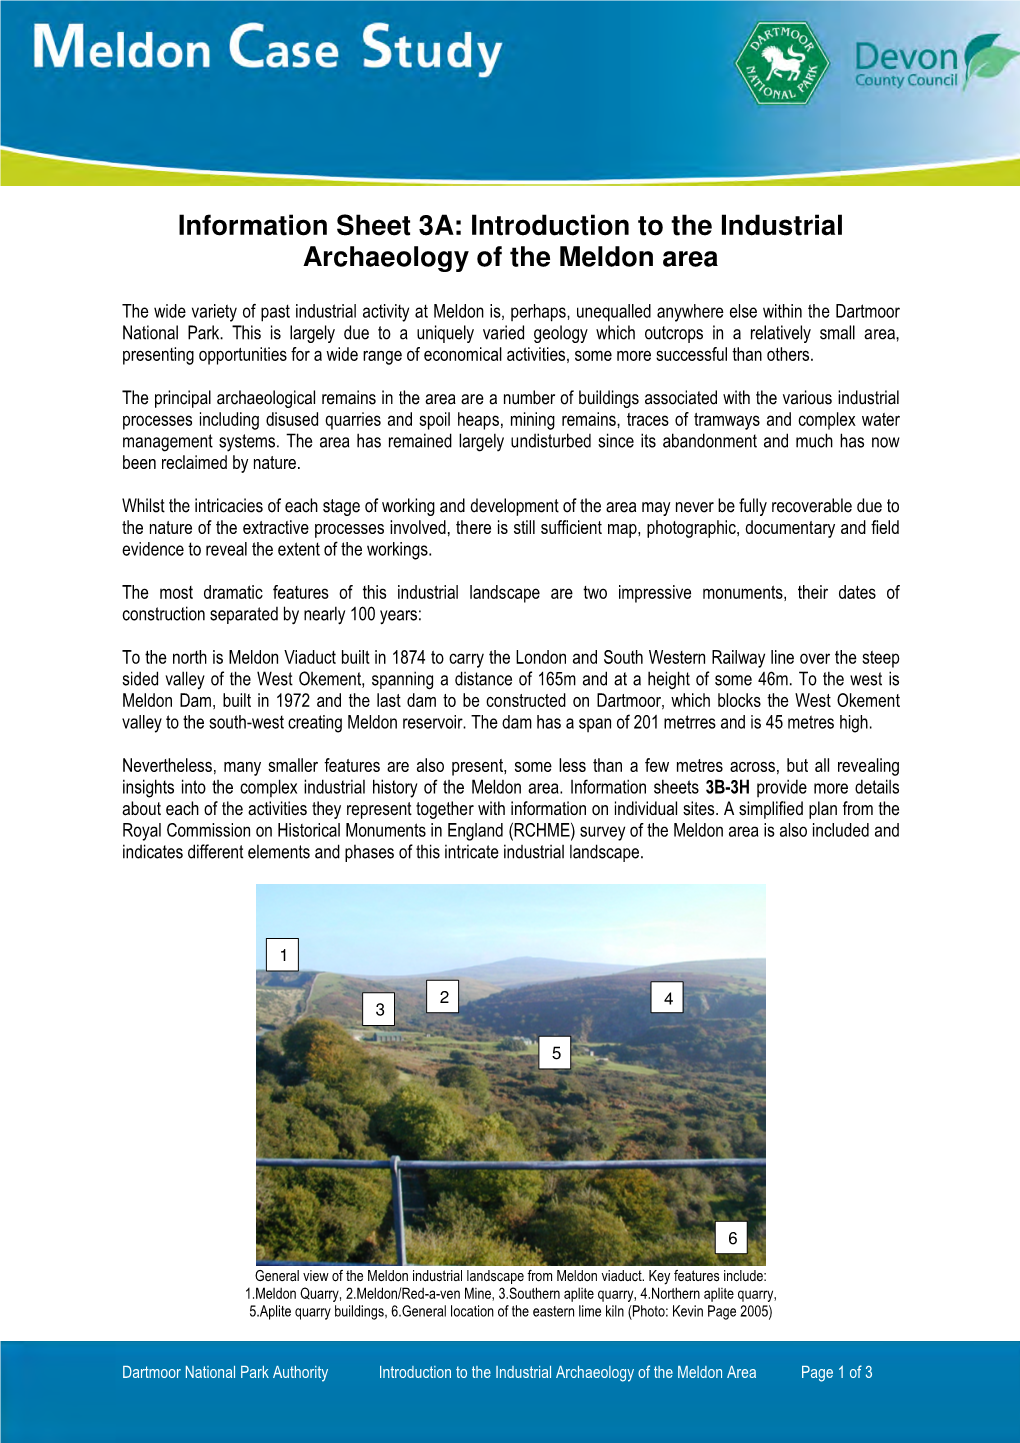 Information Sheet 3A: Introduction to the Industrial Archaeology of the Meldon Area